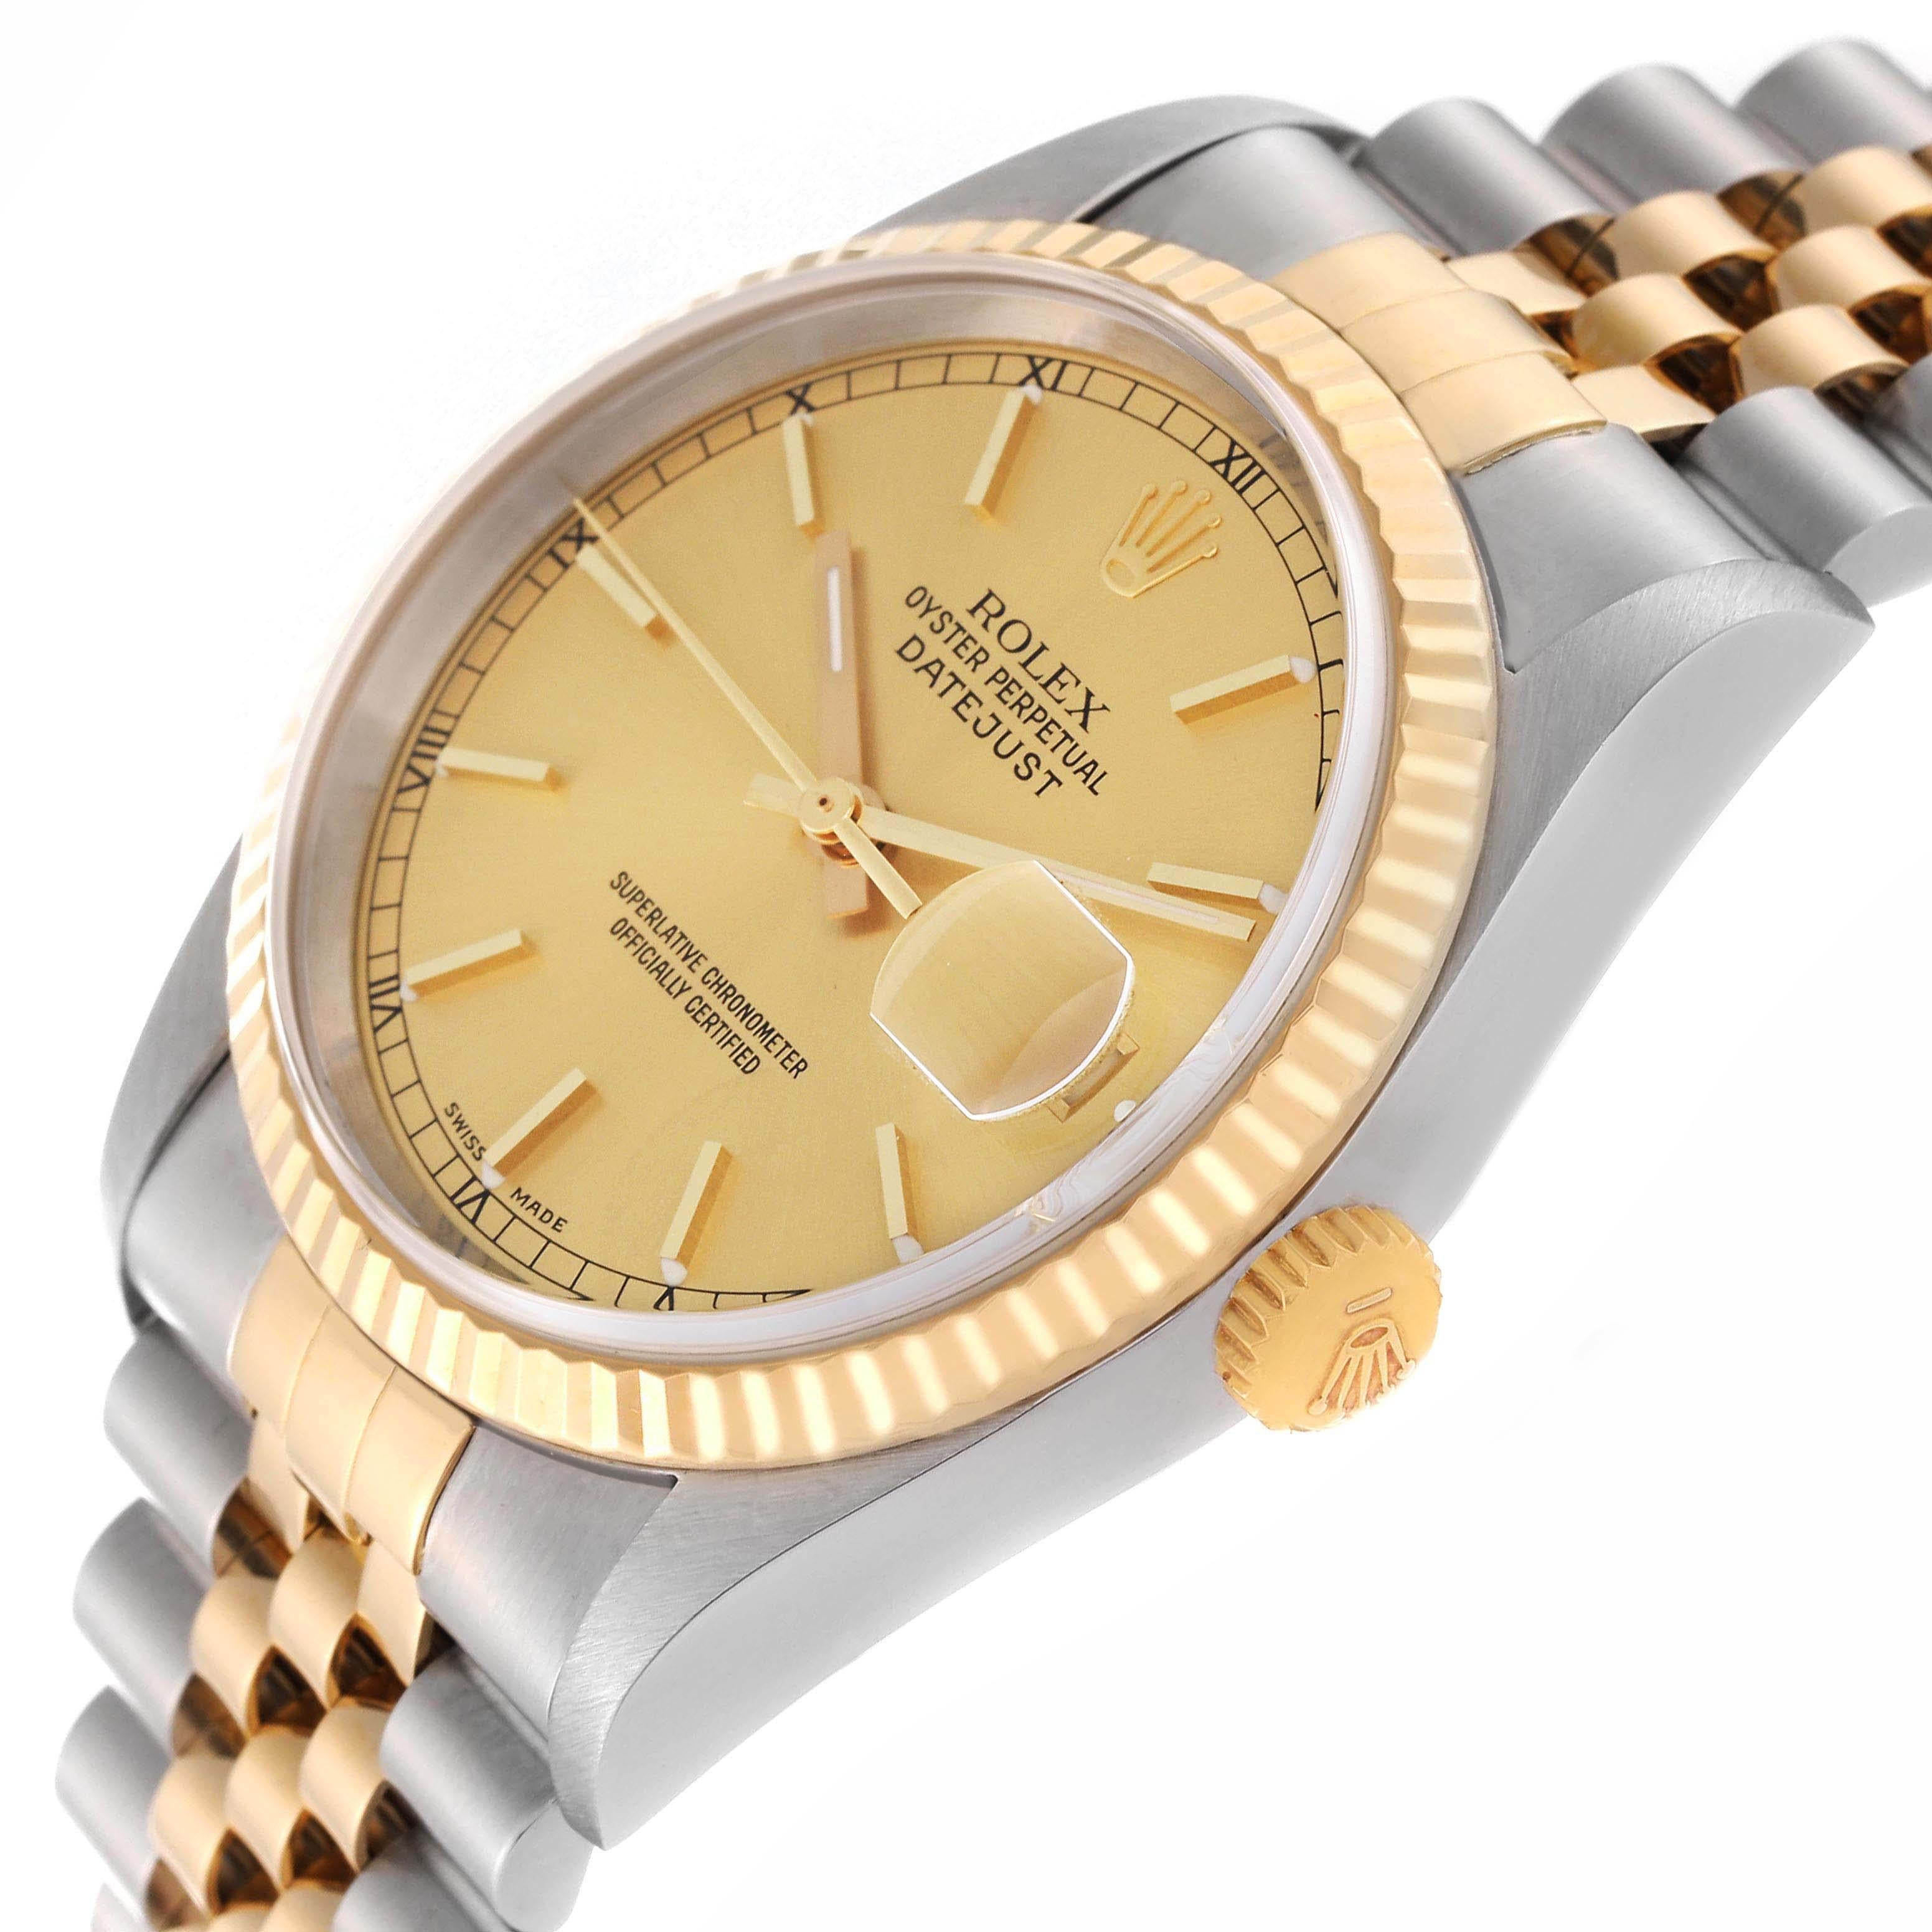 Rolex Datejust 36 Steel Yellow Gold Champagne Dial Mens Watch 16233 Box Papers For Sale 5